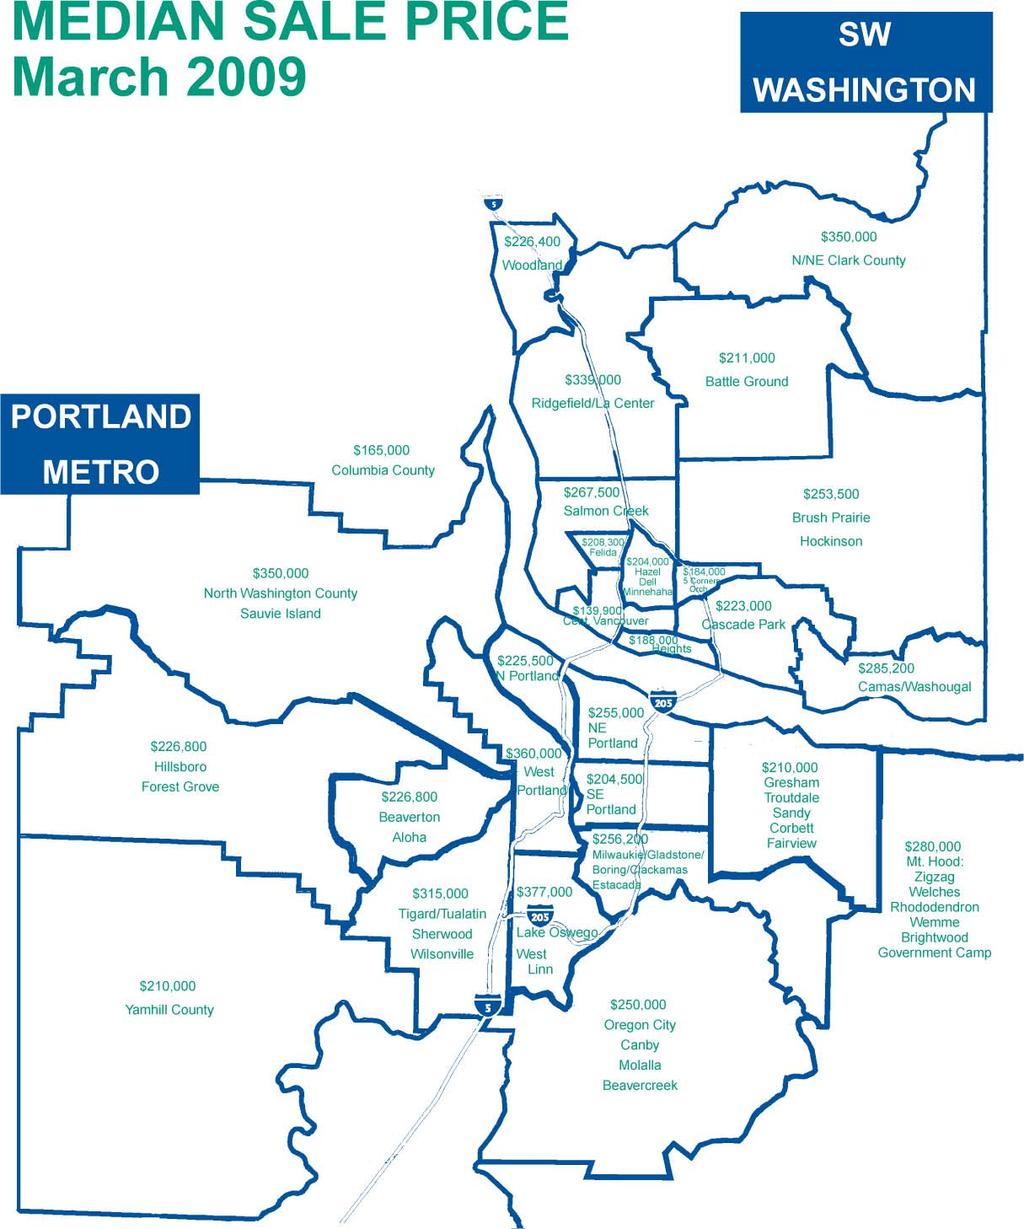 From March 2009 Market Action, a publication of the RMLS Figure 16 - Portland Metro Map SUBSIDIZED HOMEOWNERSHIP Some limited public resources are available for subsidizing homeownership for